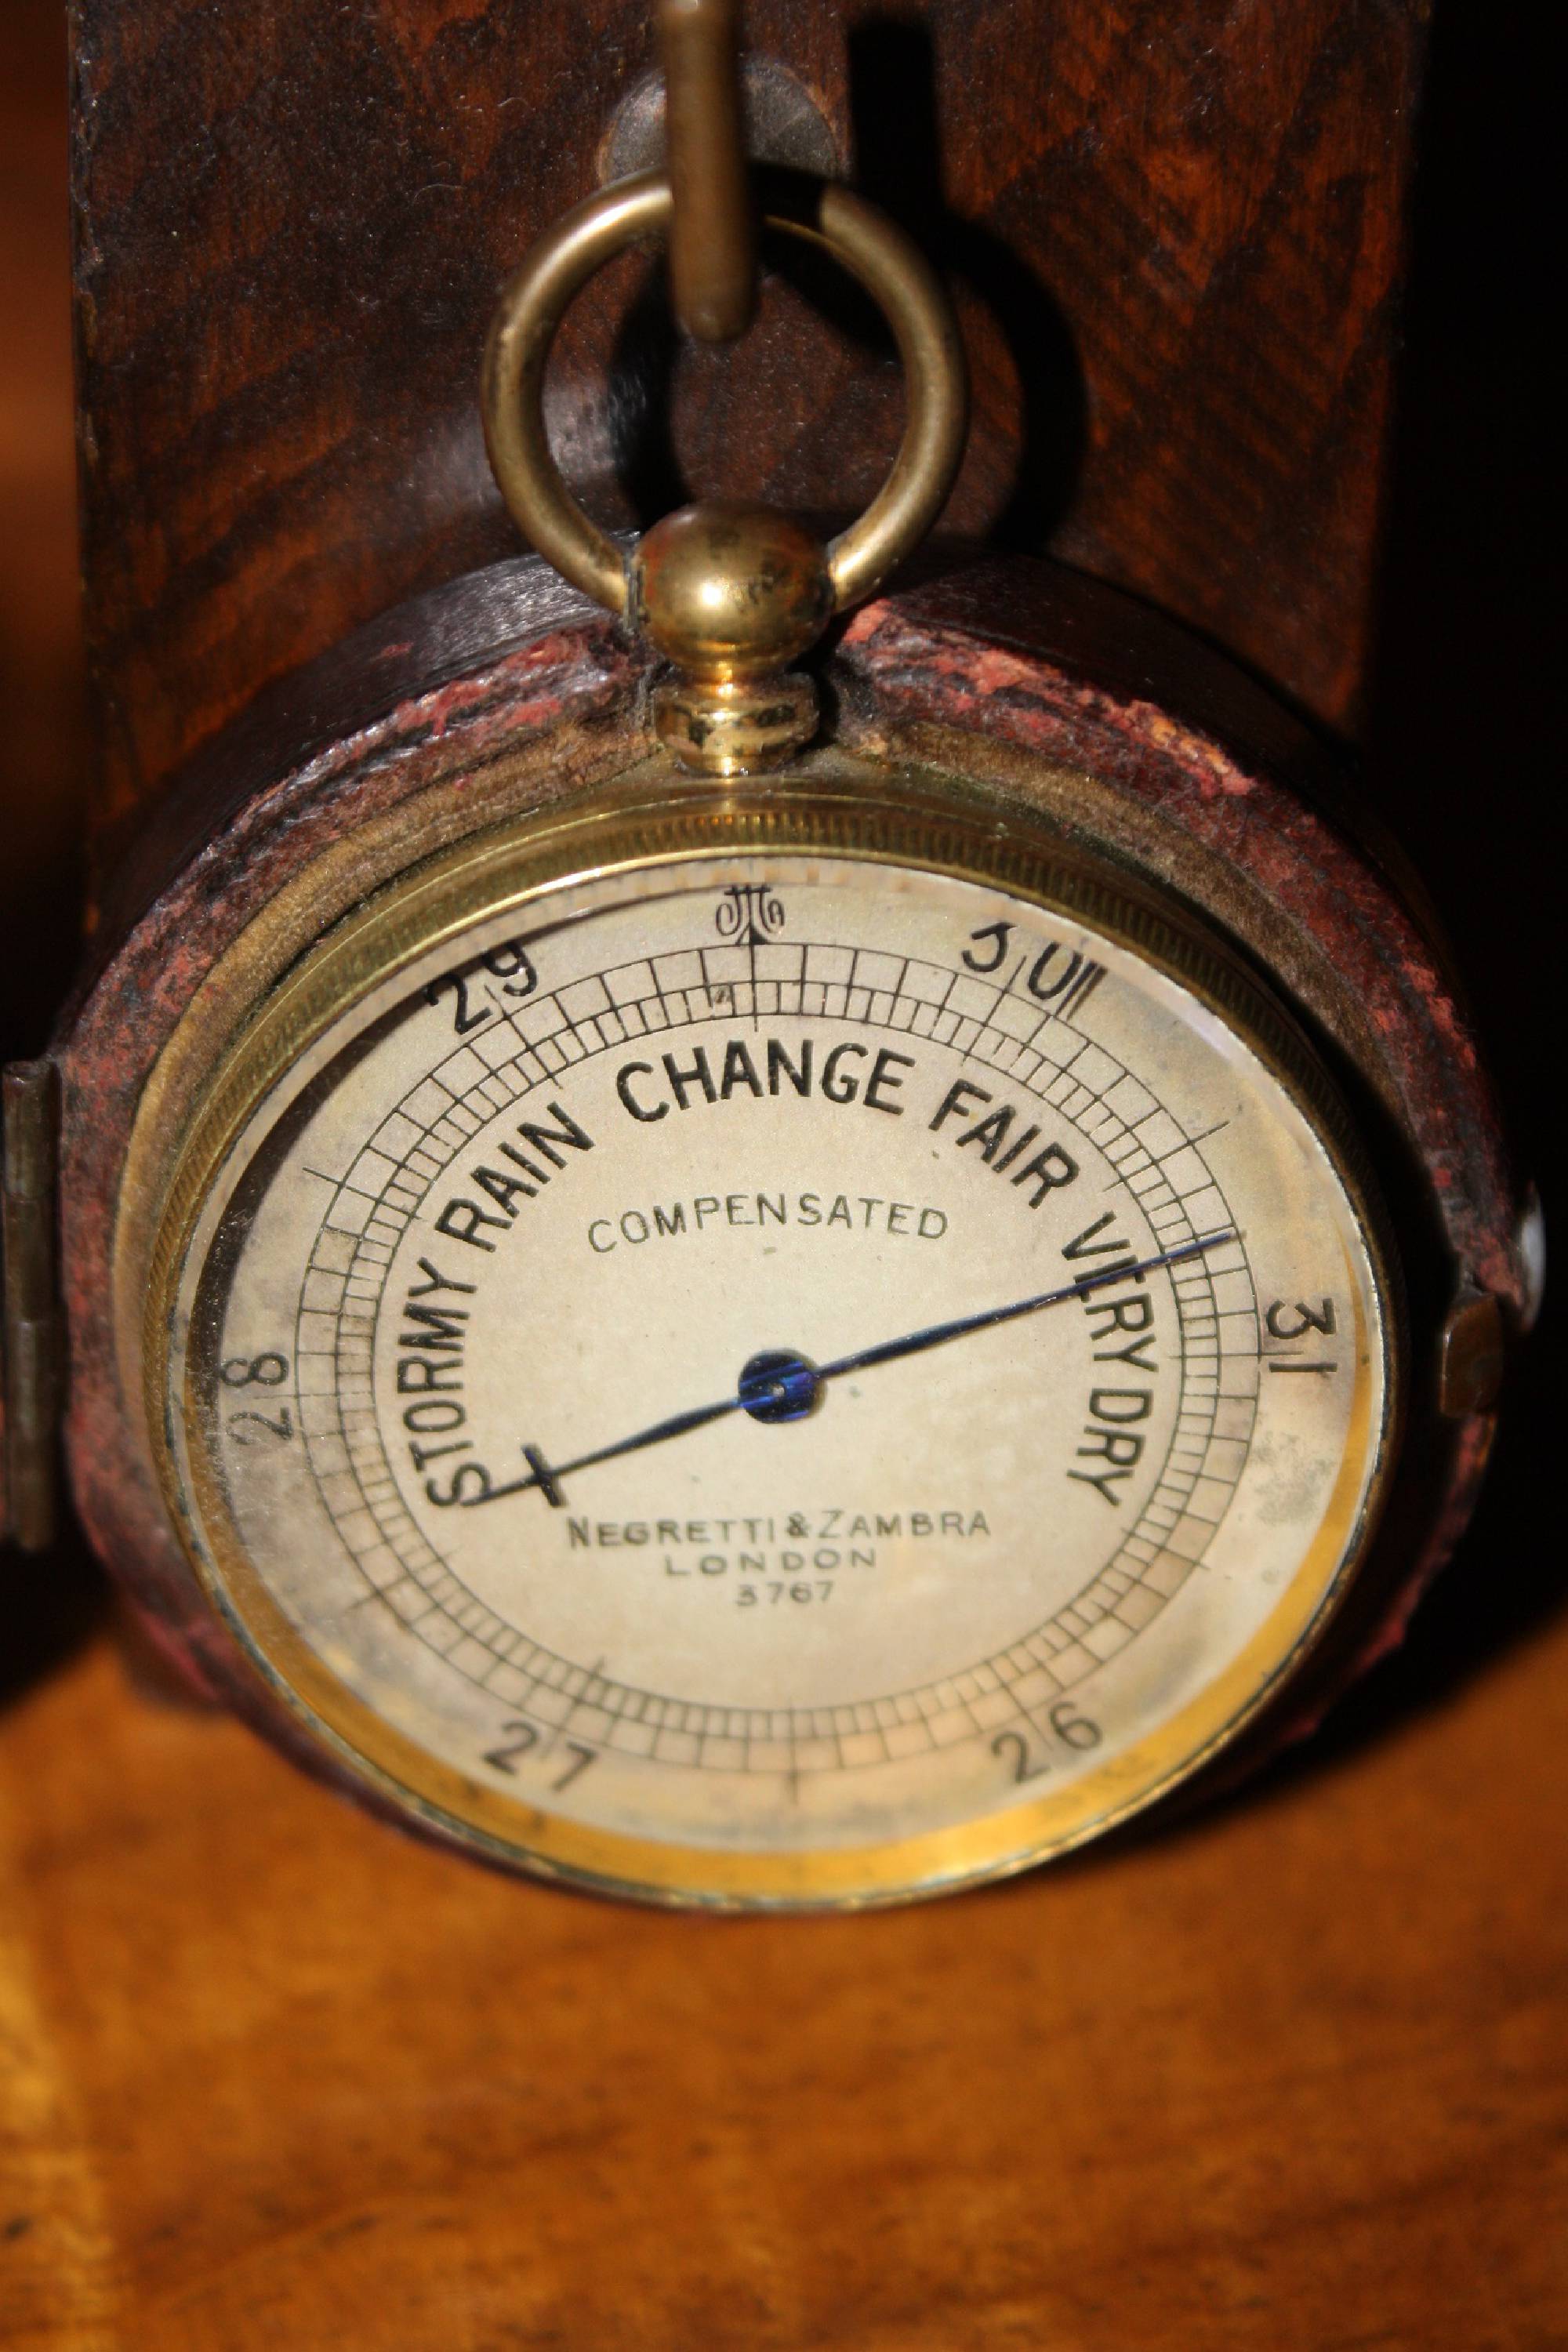 Small antique English travel-size brass barometer in a leather case, made by 'Negretti & Zambra', London